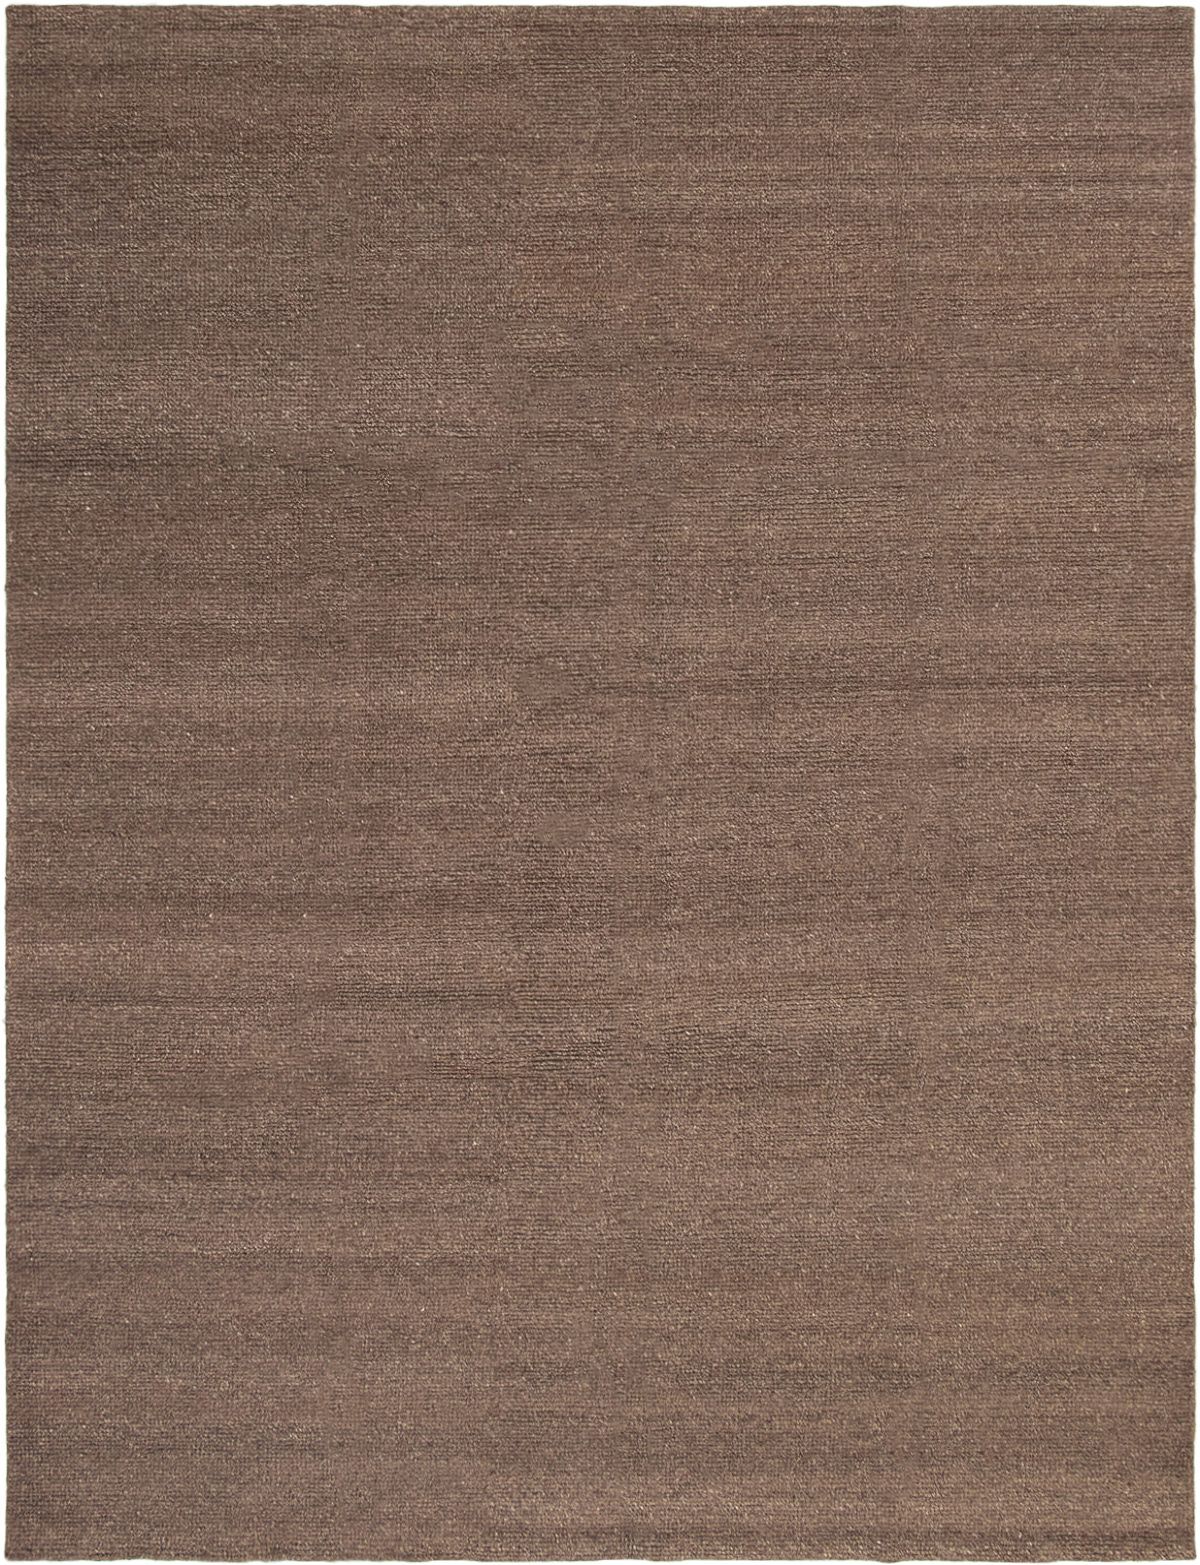 Hand-knotted Arlequin Dark Brown Wool Rug 9'0" x 12'0" Size: 9'0" x 12'0"  